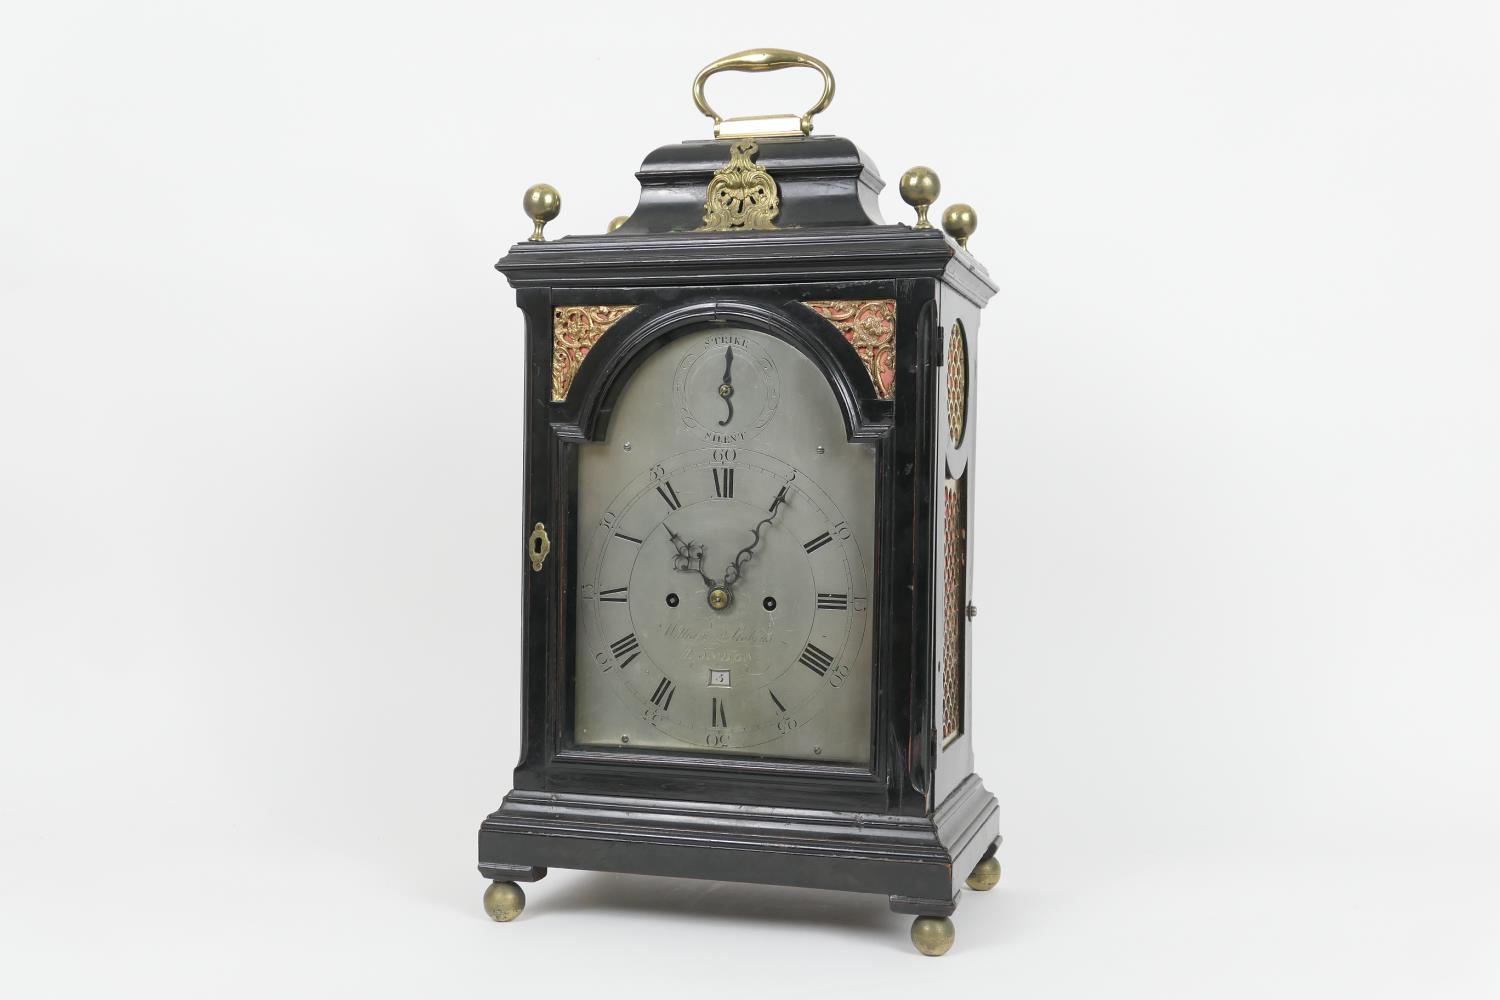 William Robbins, London (circa 1779-1816), George III ebonised table clock, with caddy top centred